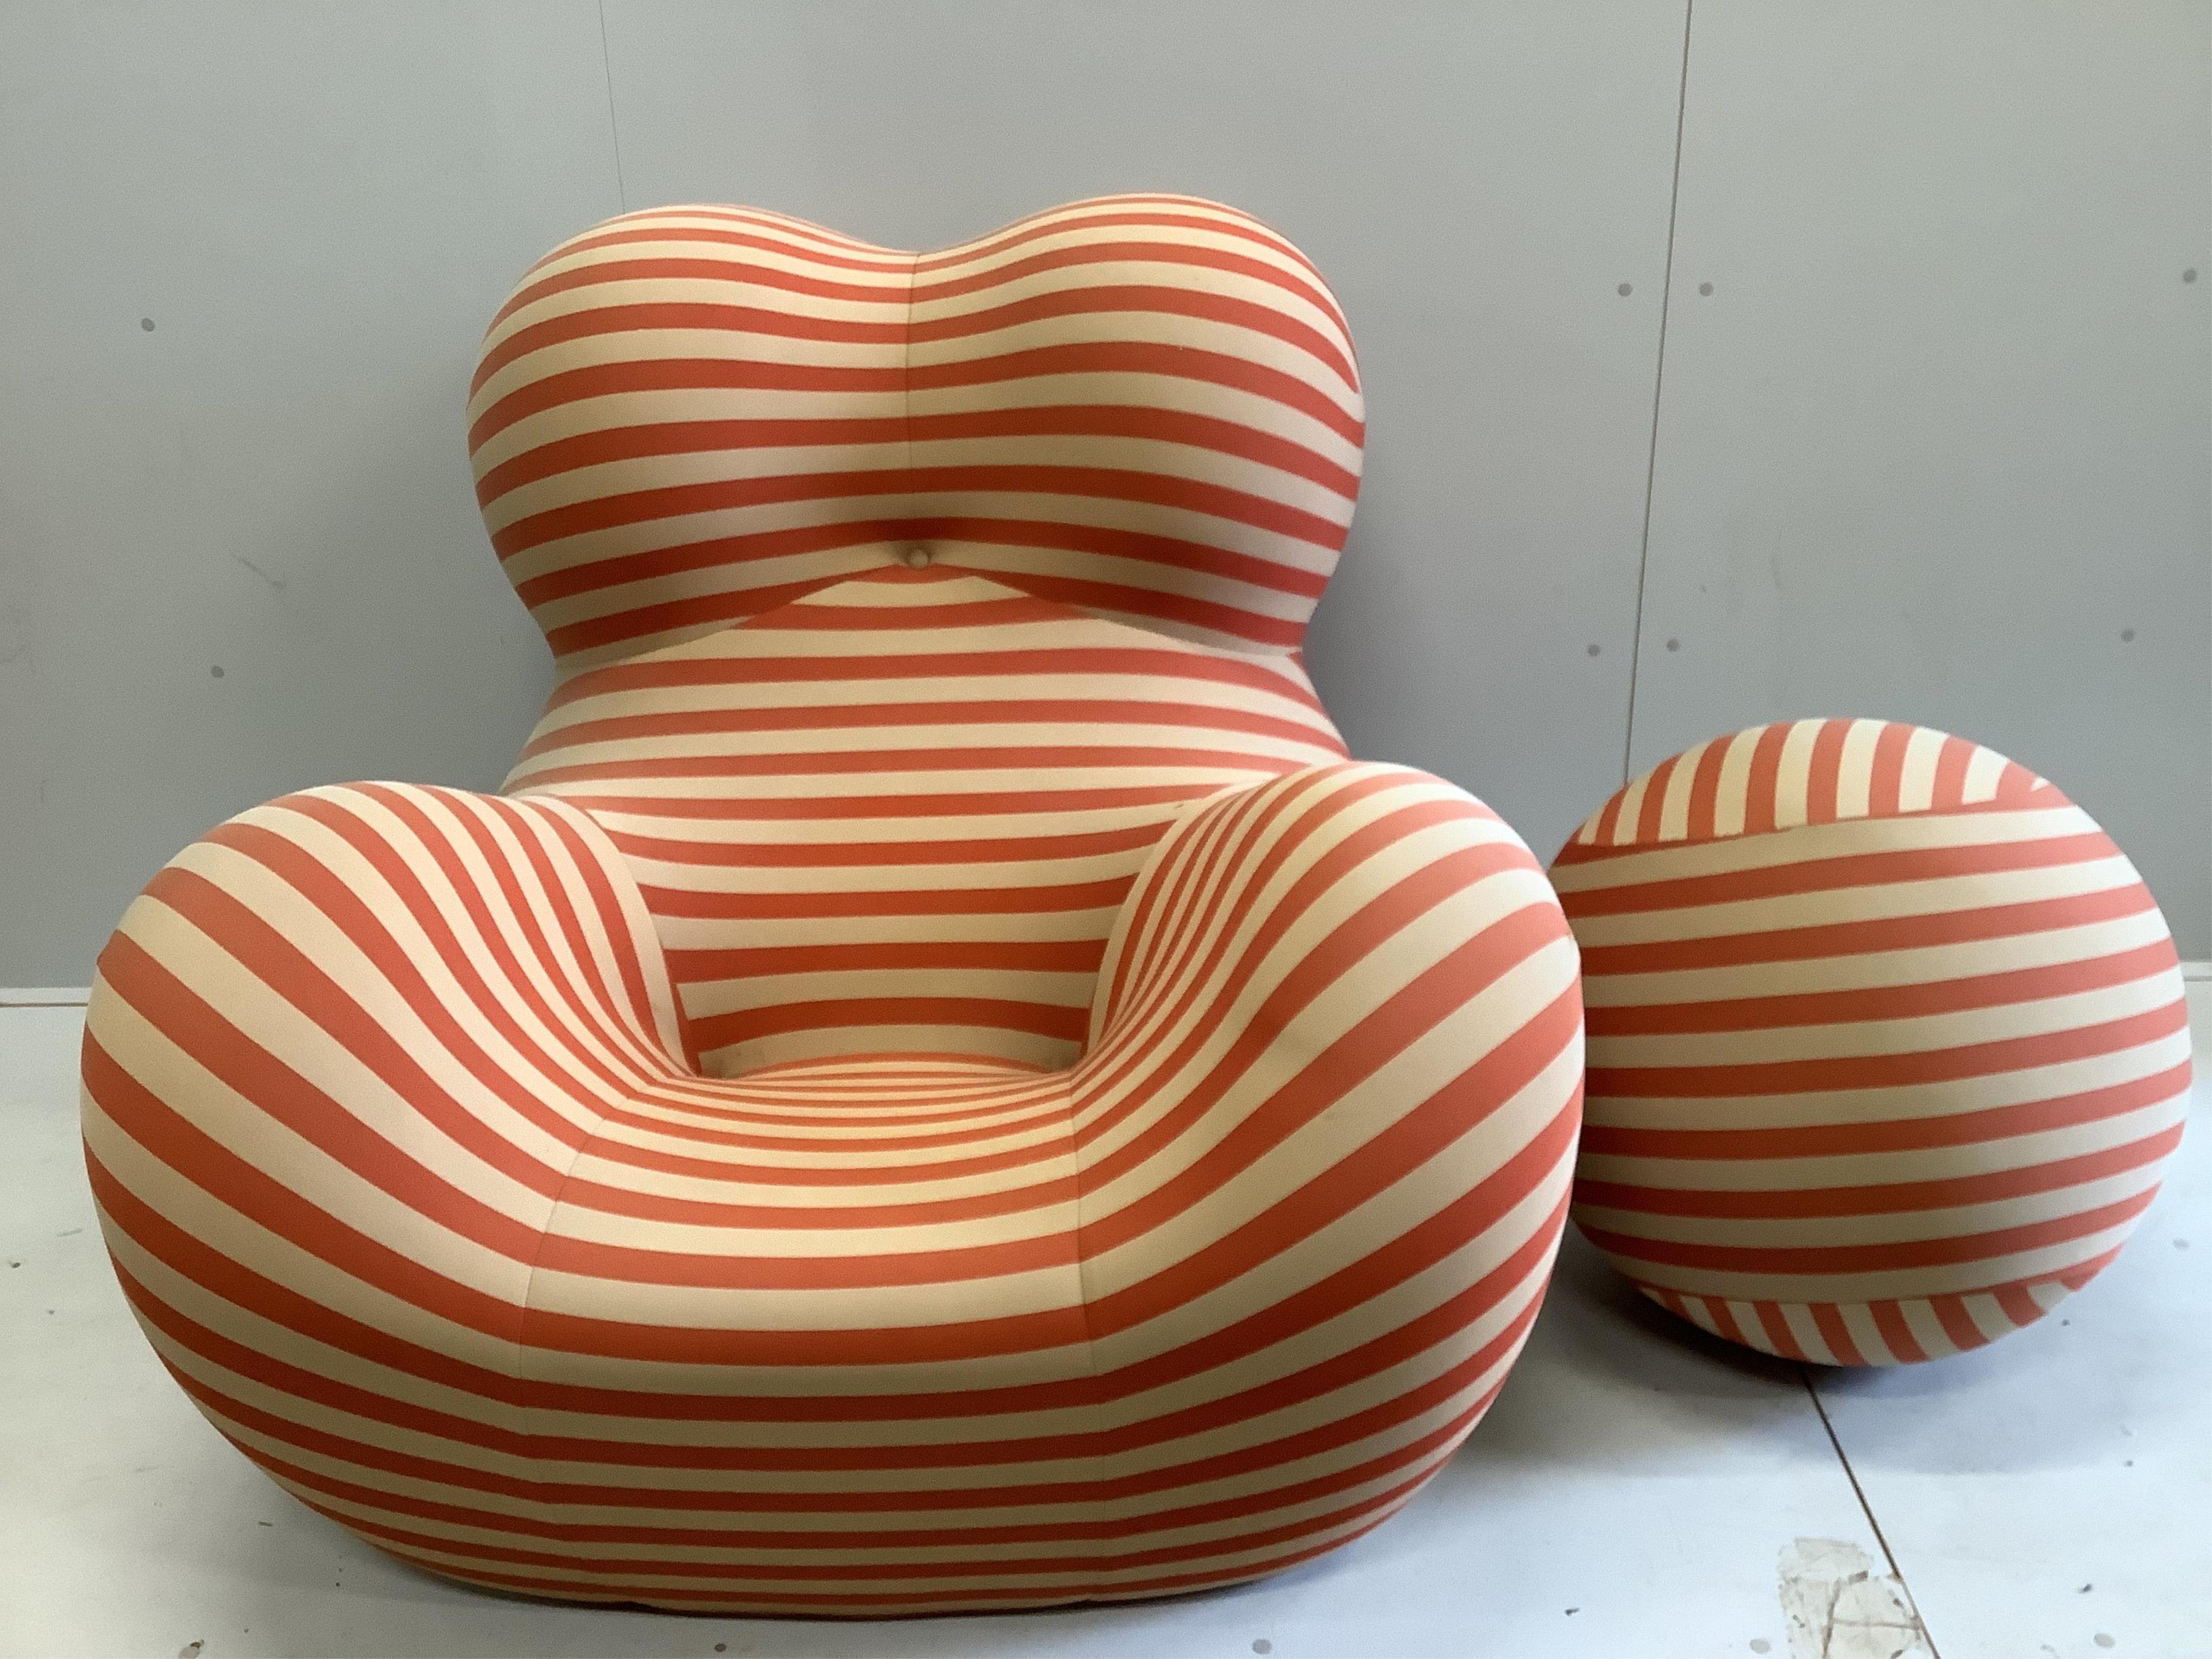 A B&B Italia UP 5 Mama Chair, width 110cm, depth 110cm, height 100cm and a UP 6 Stool by Gaetano Pesce